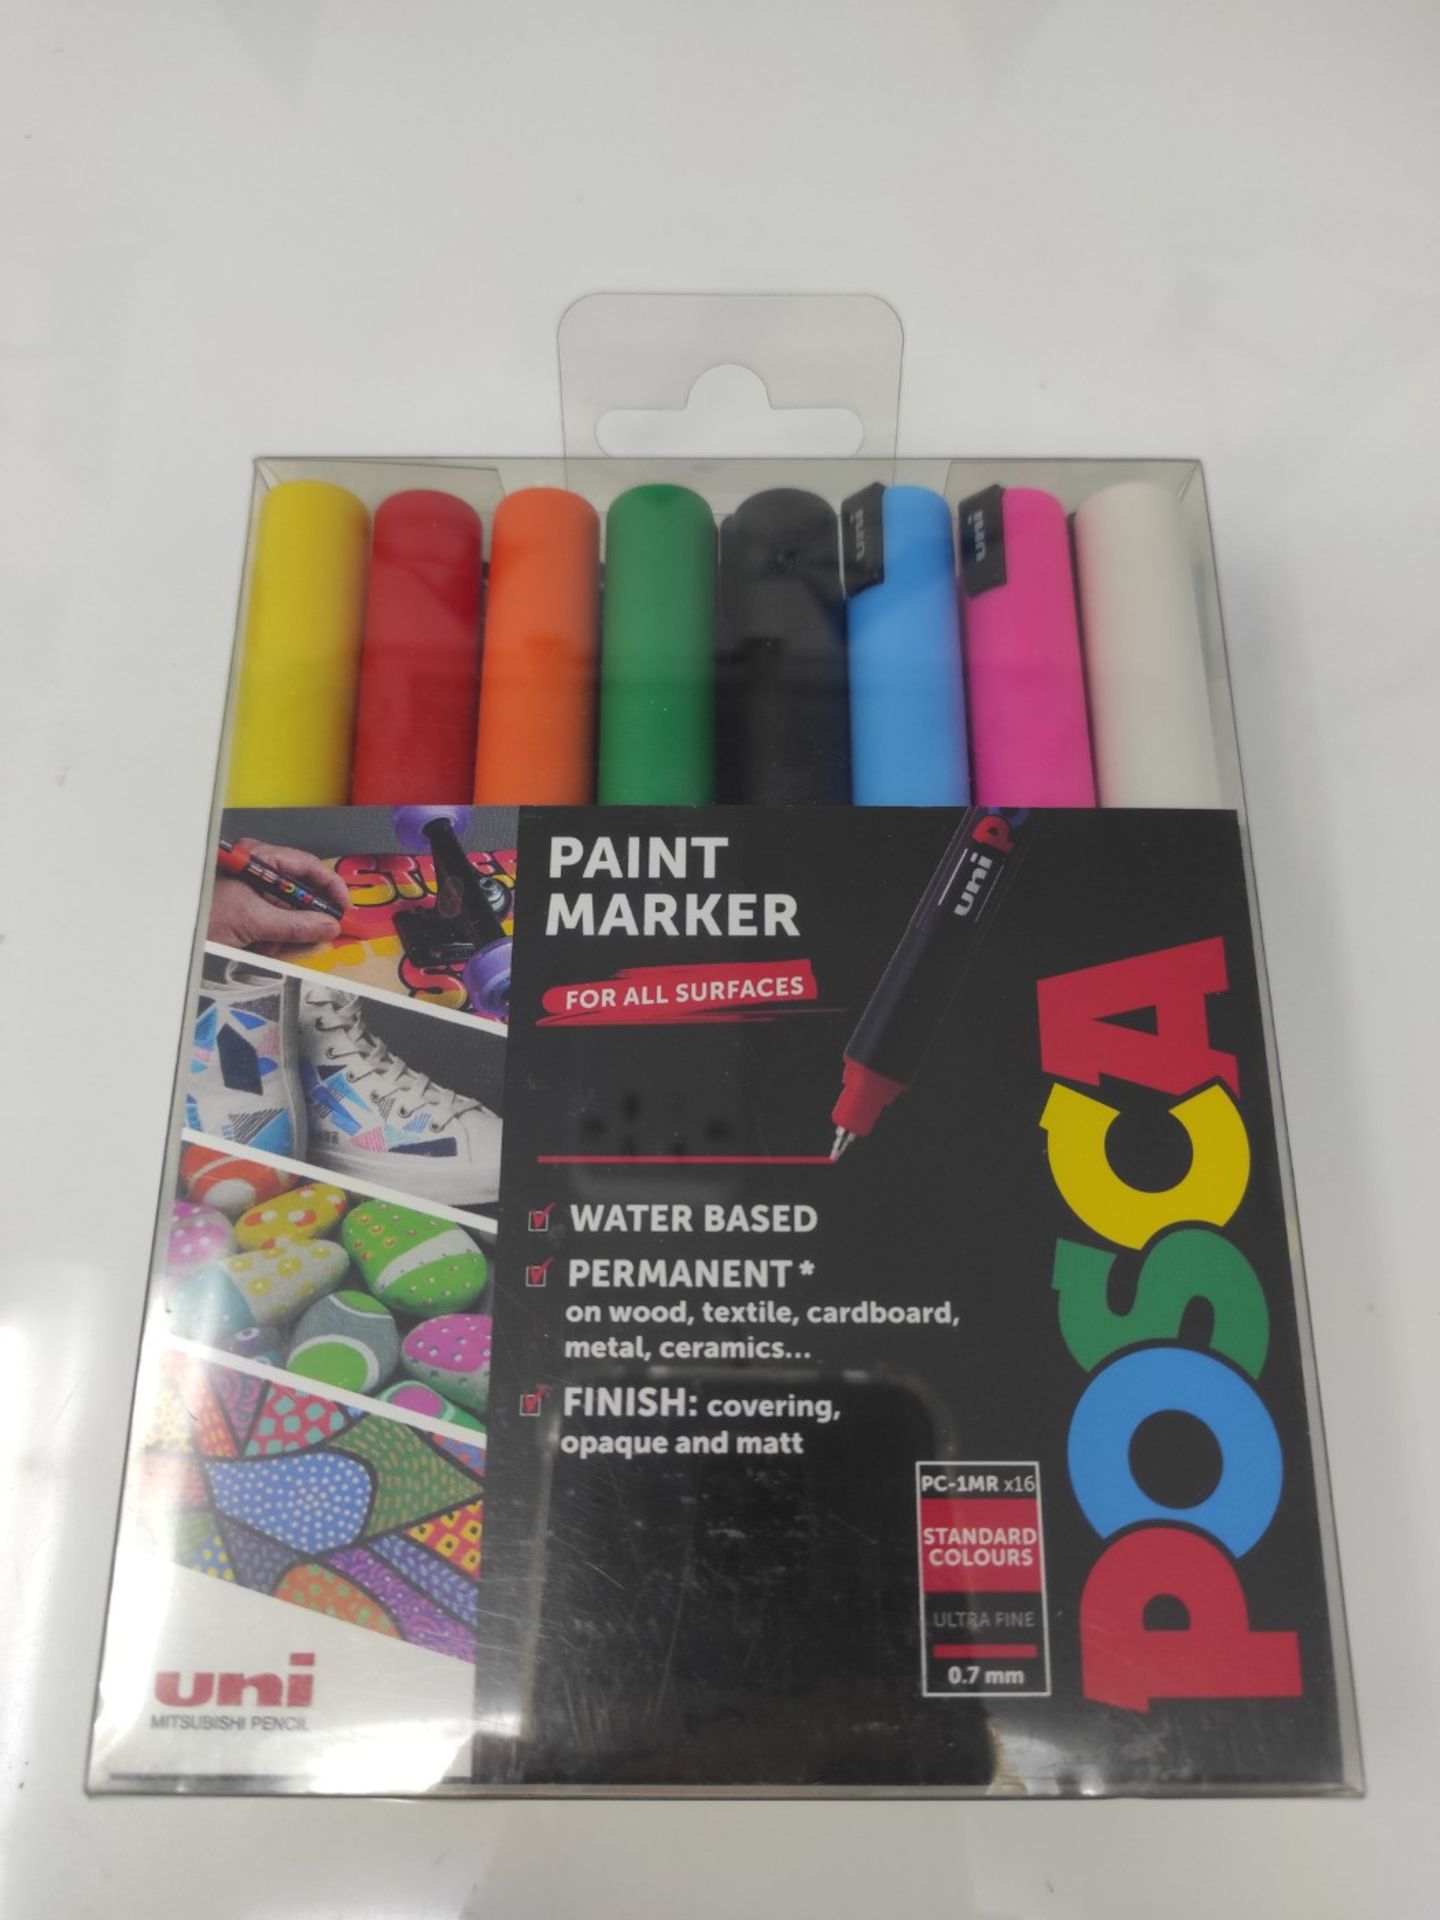 [NEW] POSCA PC-1MR Permanent Marker Paint Pens. Ultra Fine Tip for Art & Crafts. Multi - Image 2 of 2